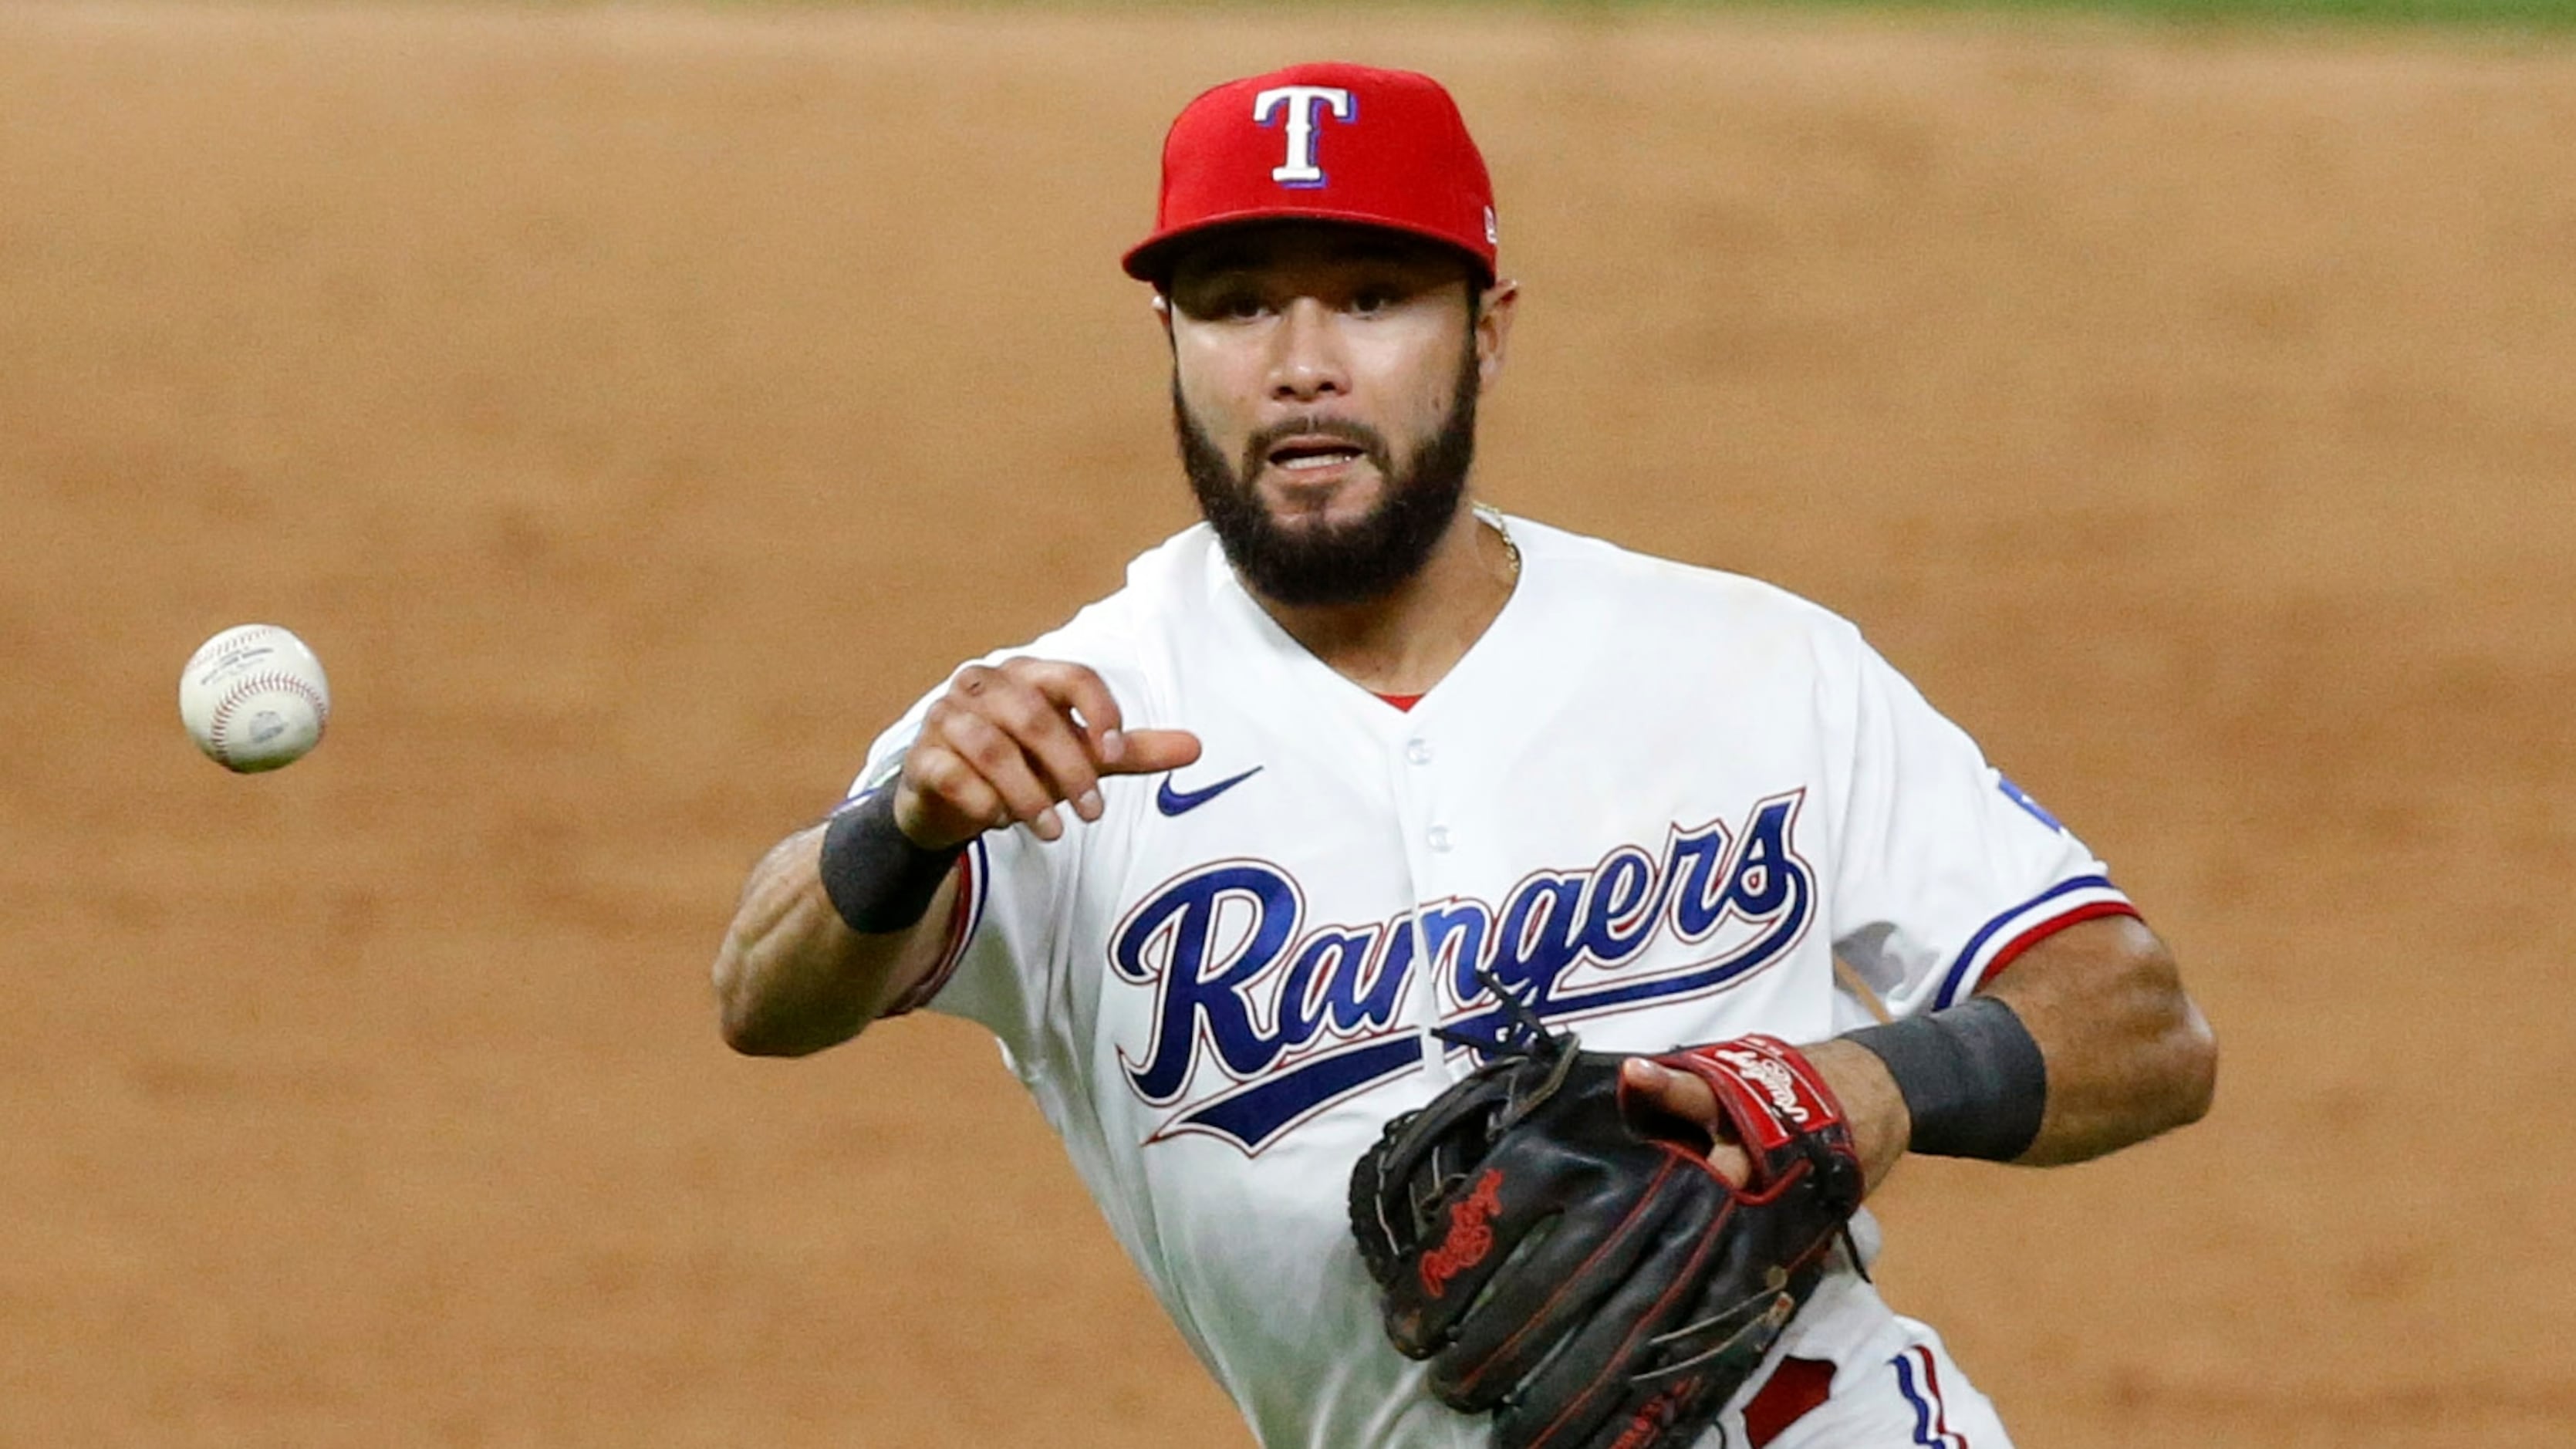 Rangers 1-year deals with Gold Glovers Gallo, Kiner-Falefa